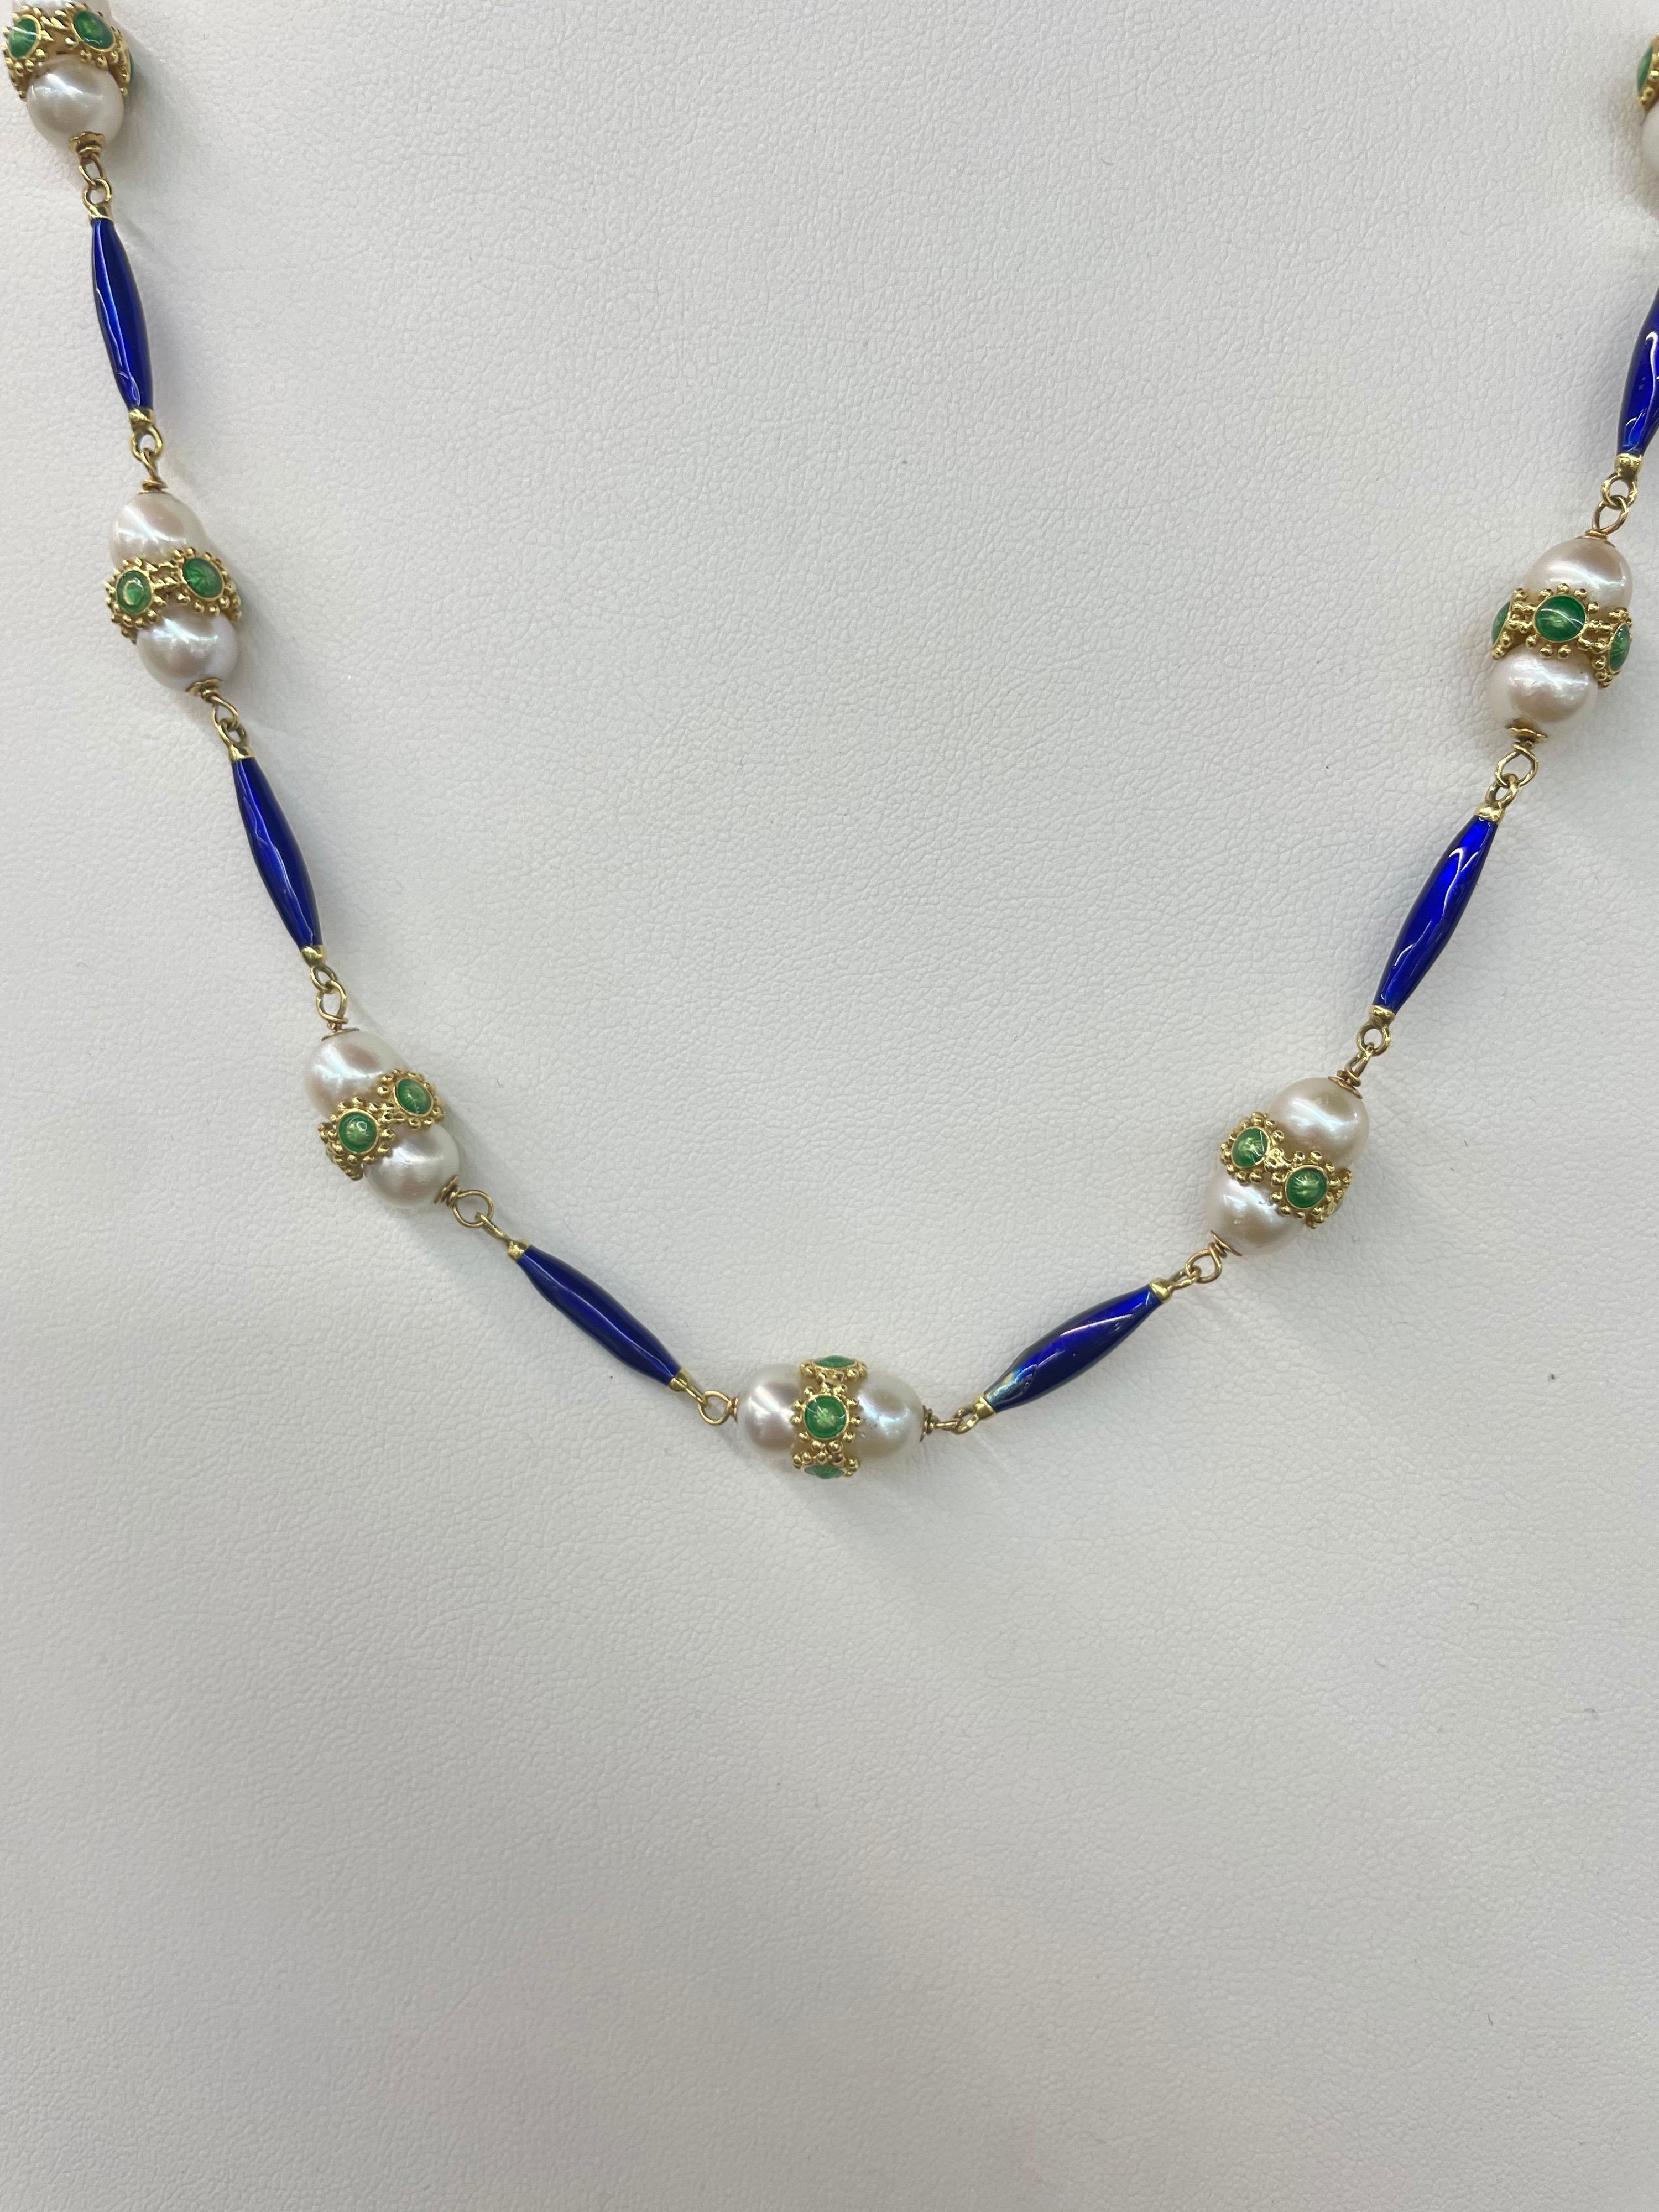 18 Karat Yellow Gold necklace featuring 16 sections of Japanese Culture Pearls with decorative links of blue and green enamel floral gold motifs. 